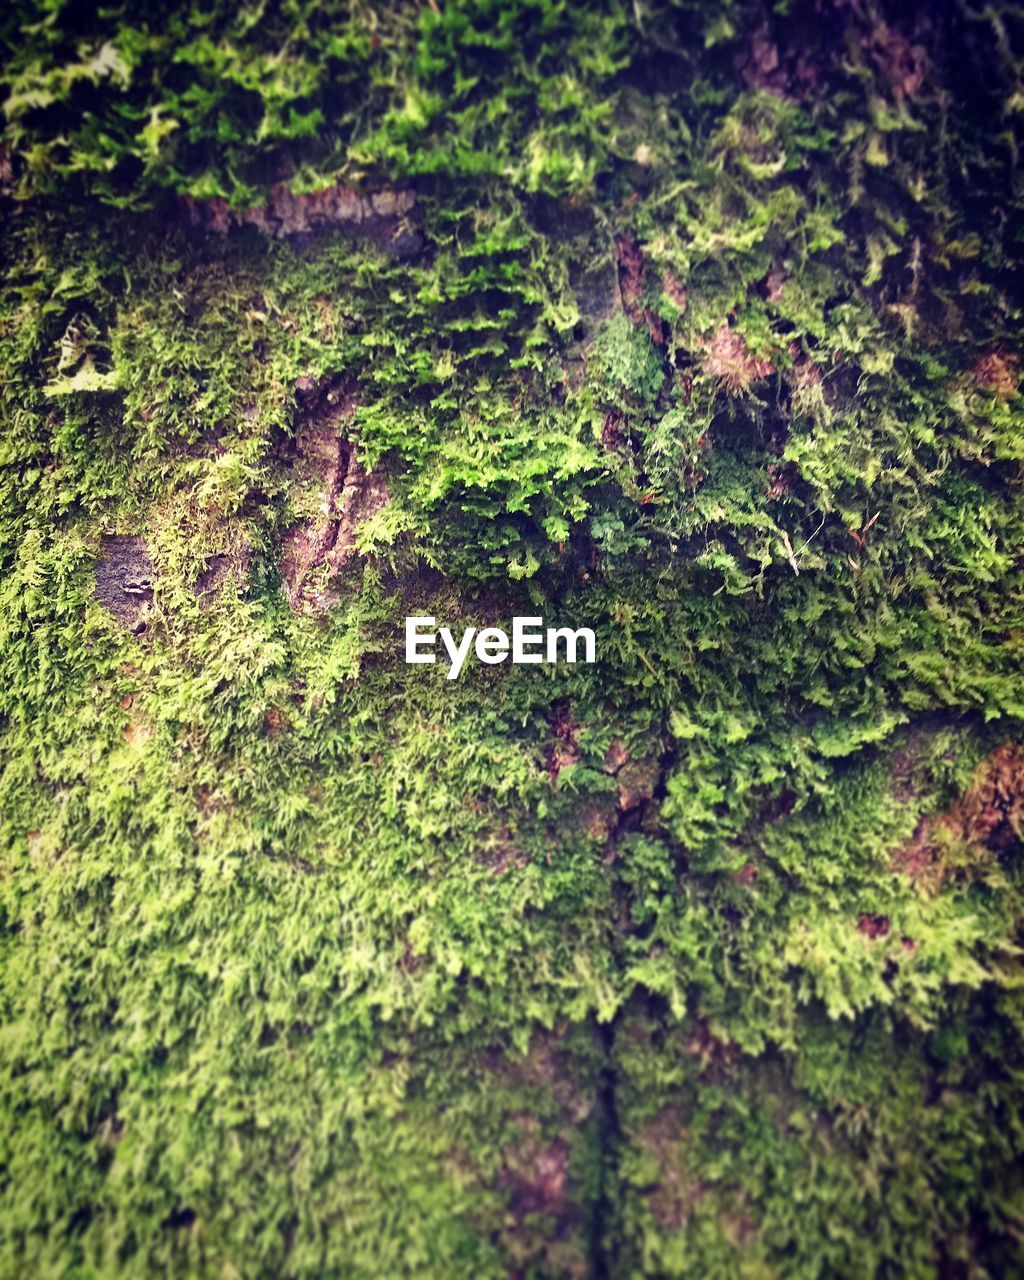 CLOSE-UP OF MOSS GROWING ON TREE TRUNKS